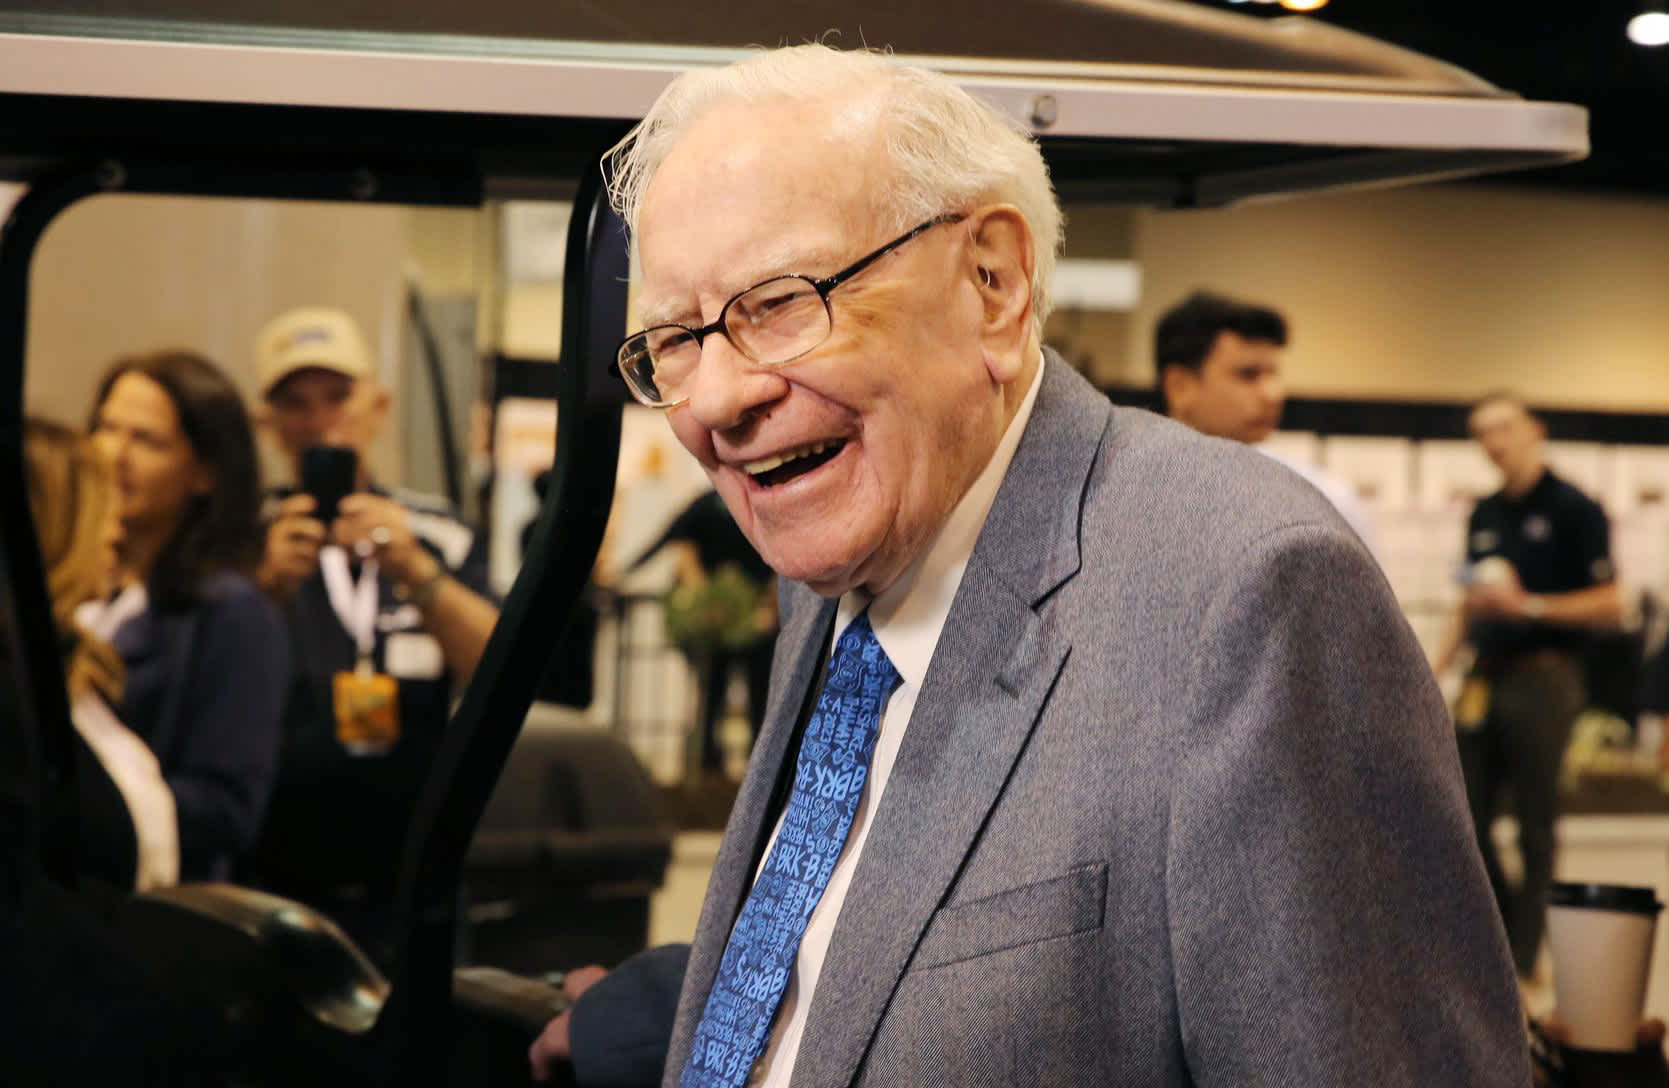 Berkshire Hathaway’s operating earnings rise nearly 7%, cash pile approaches $150 billion